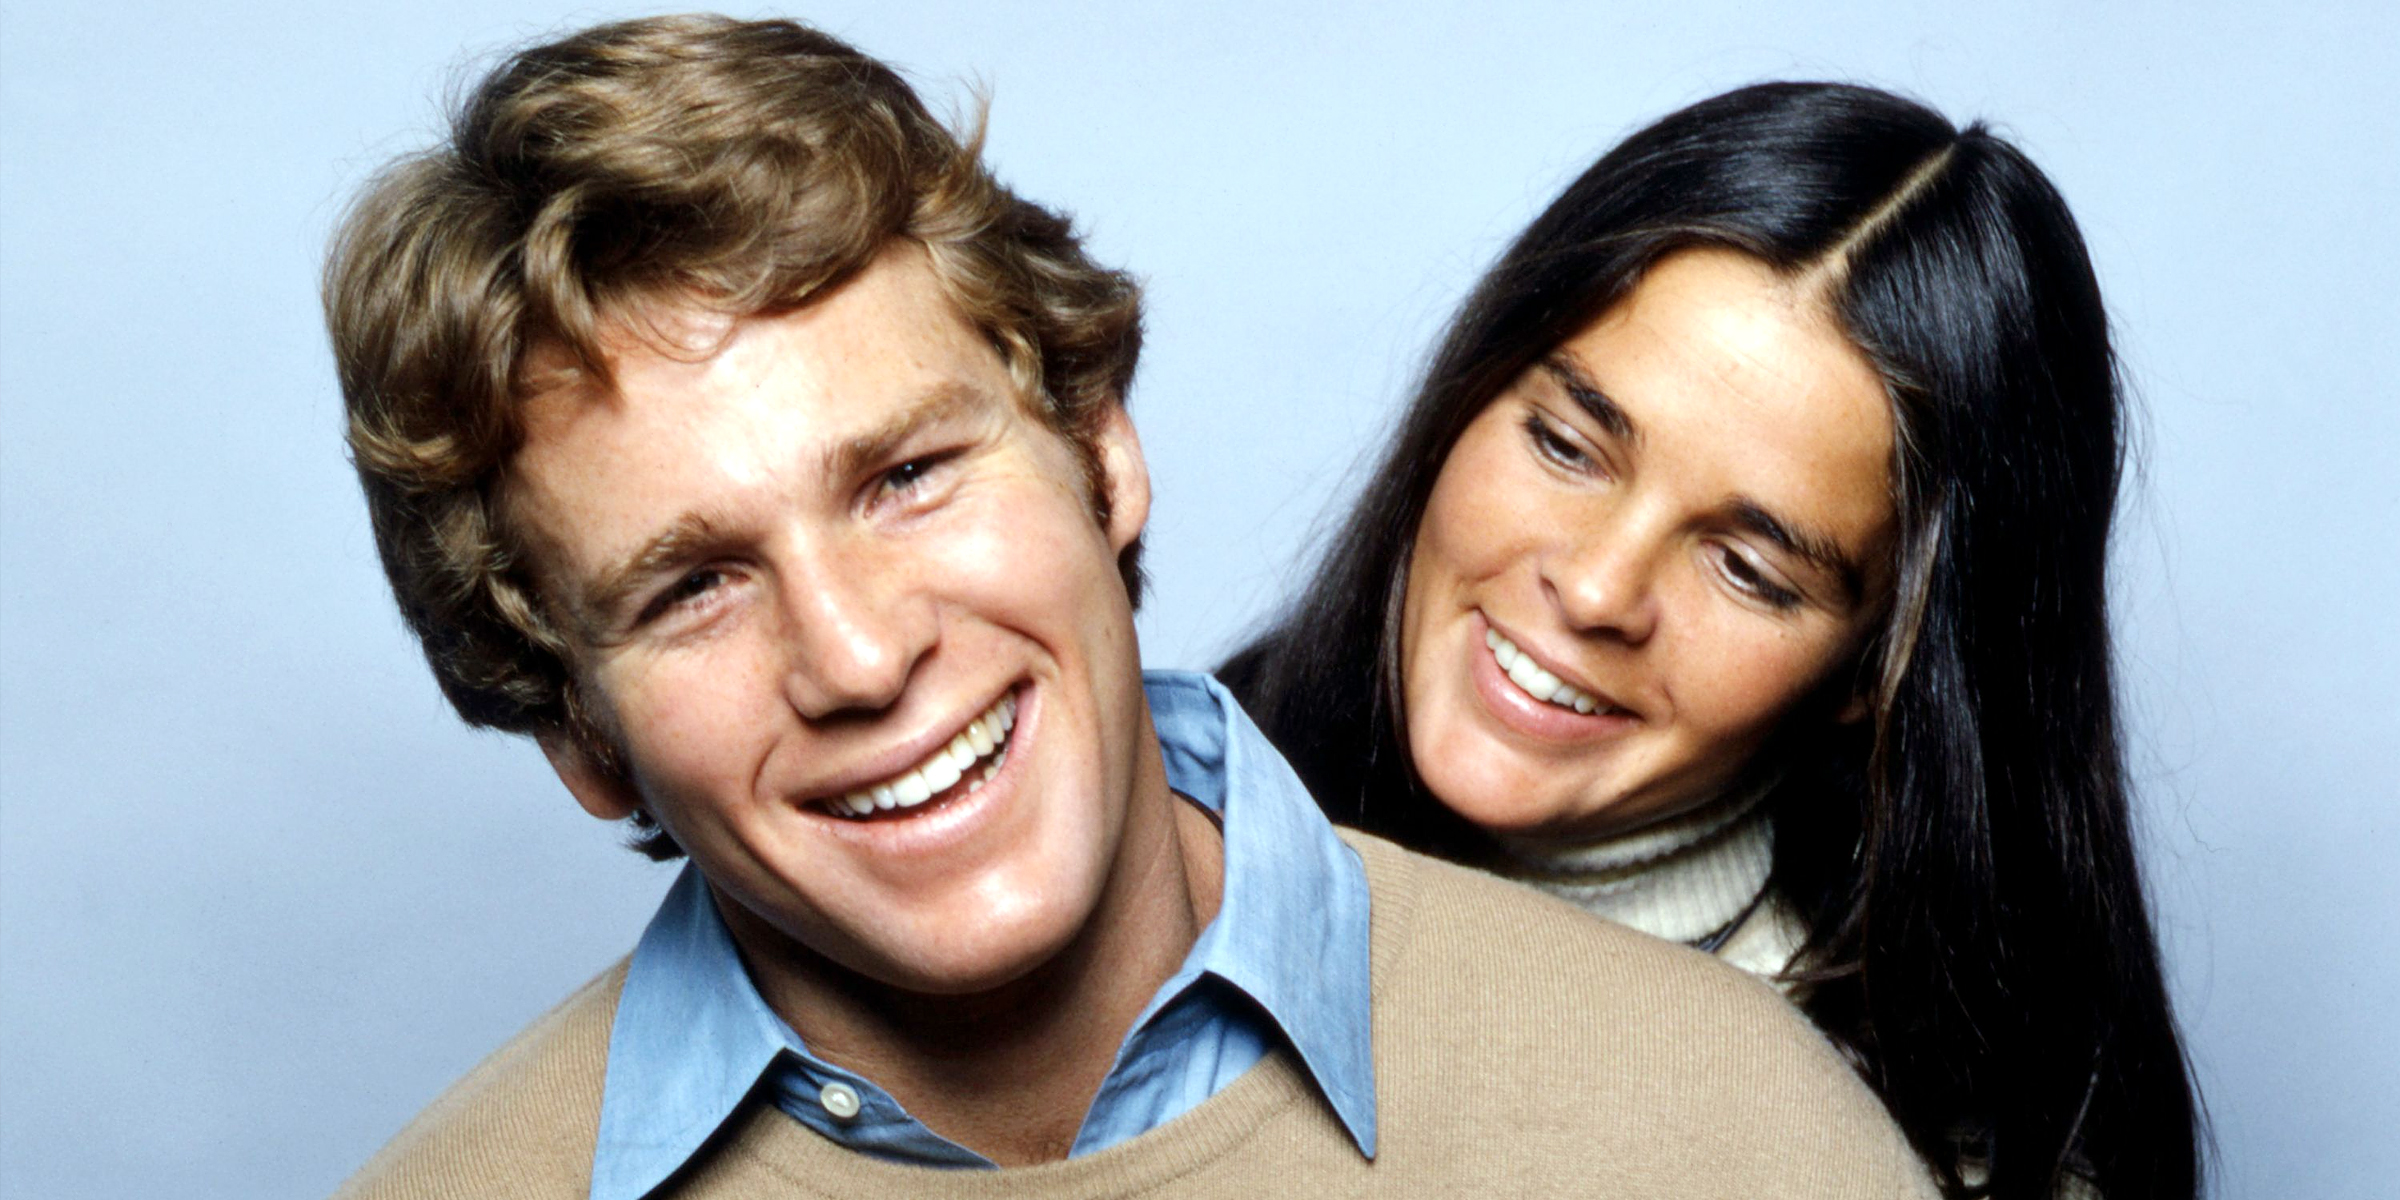 Ryan O'Neal and Ali MacGraw | Source: Getty Images